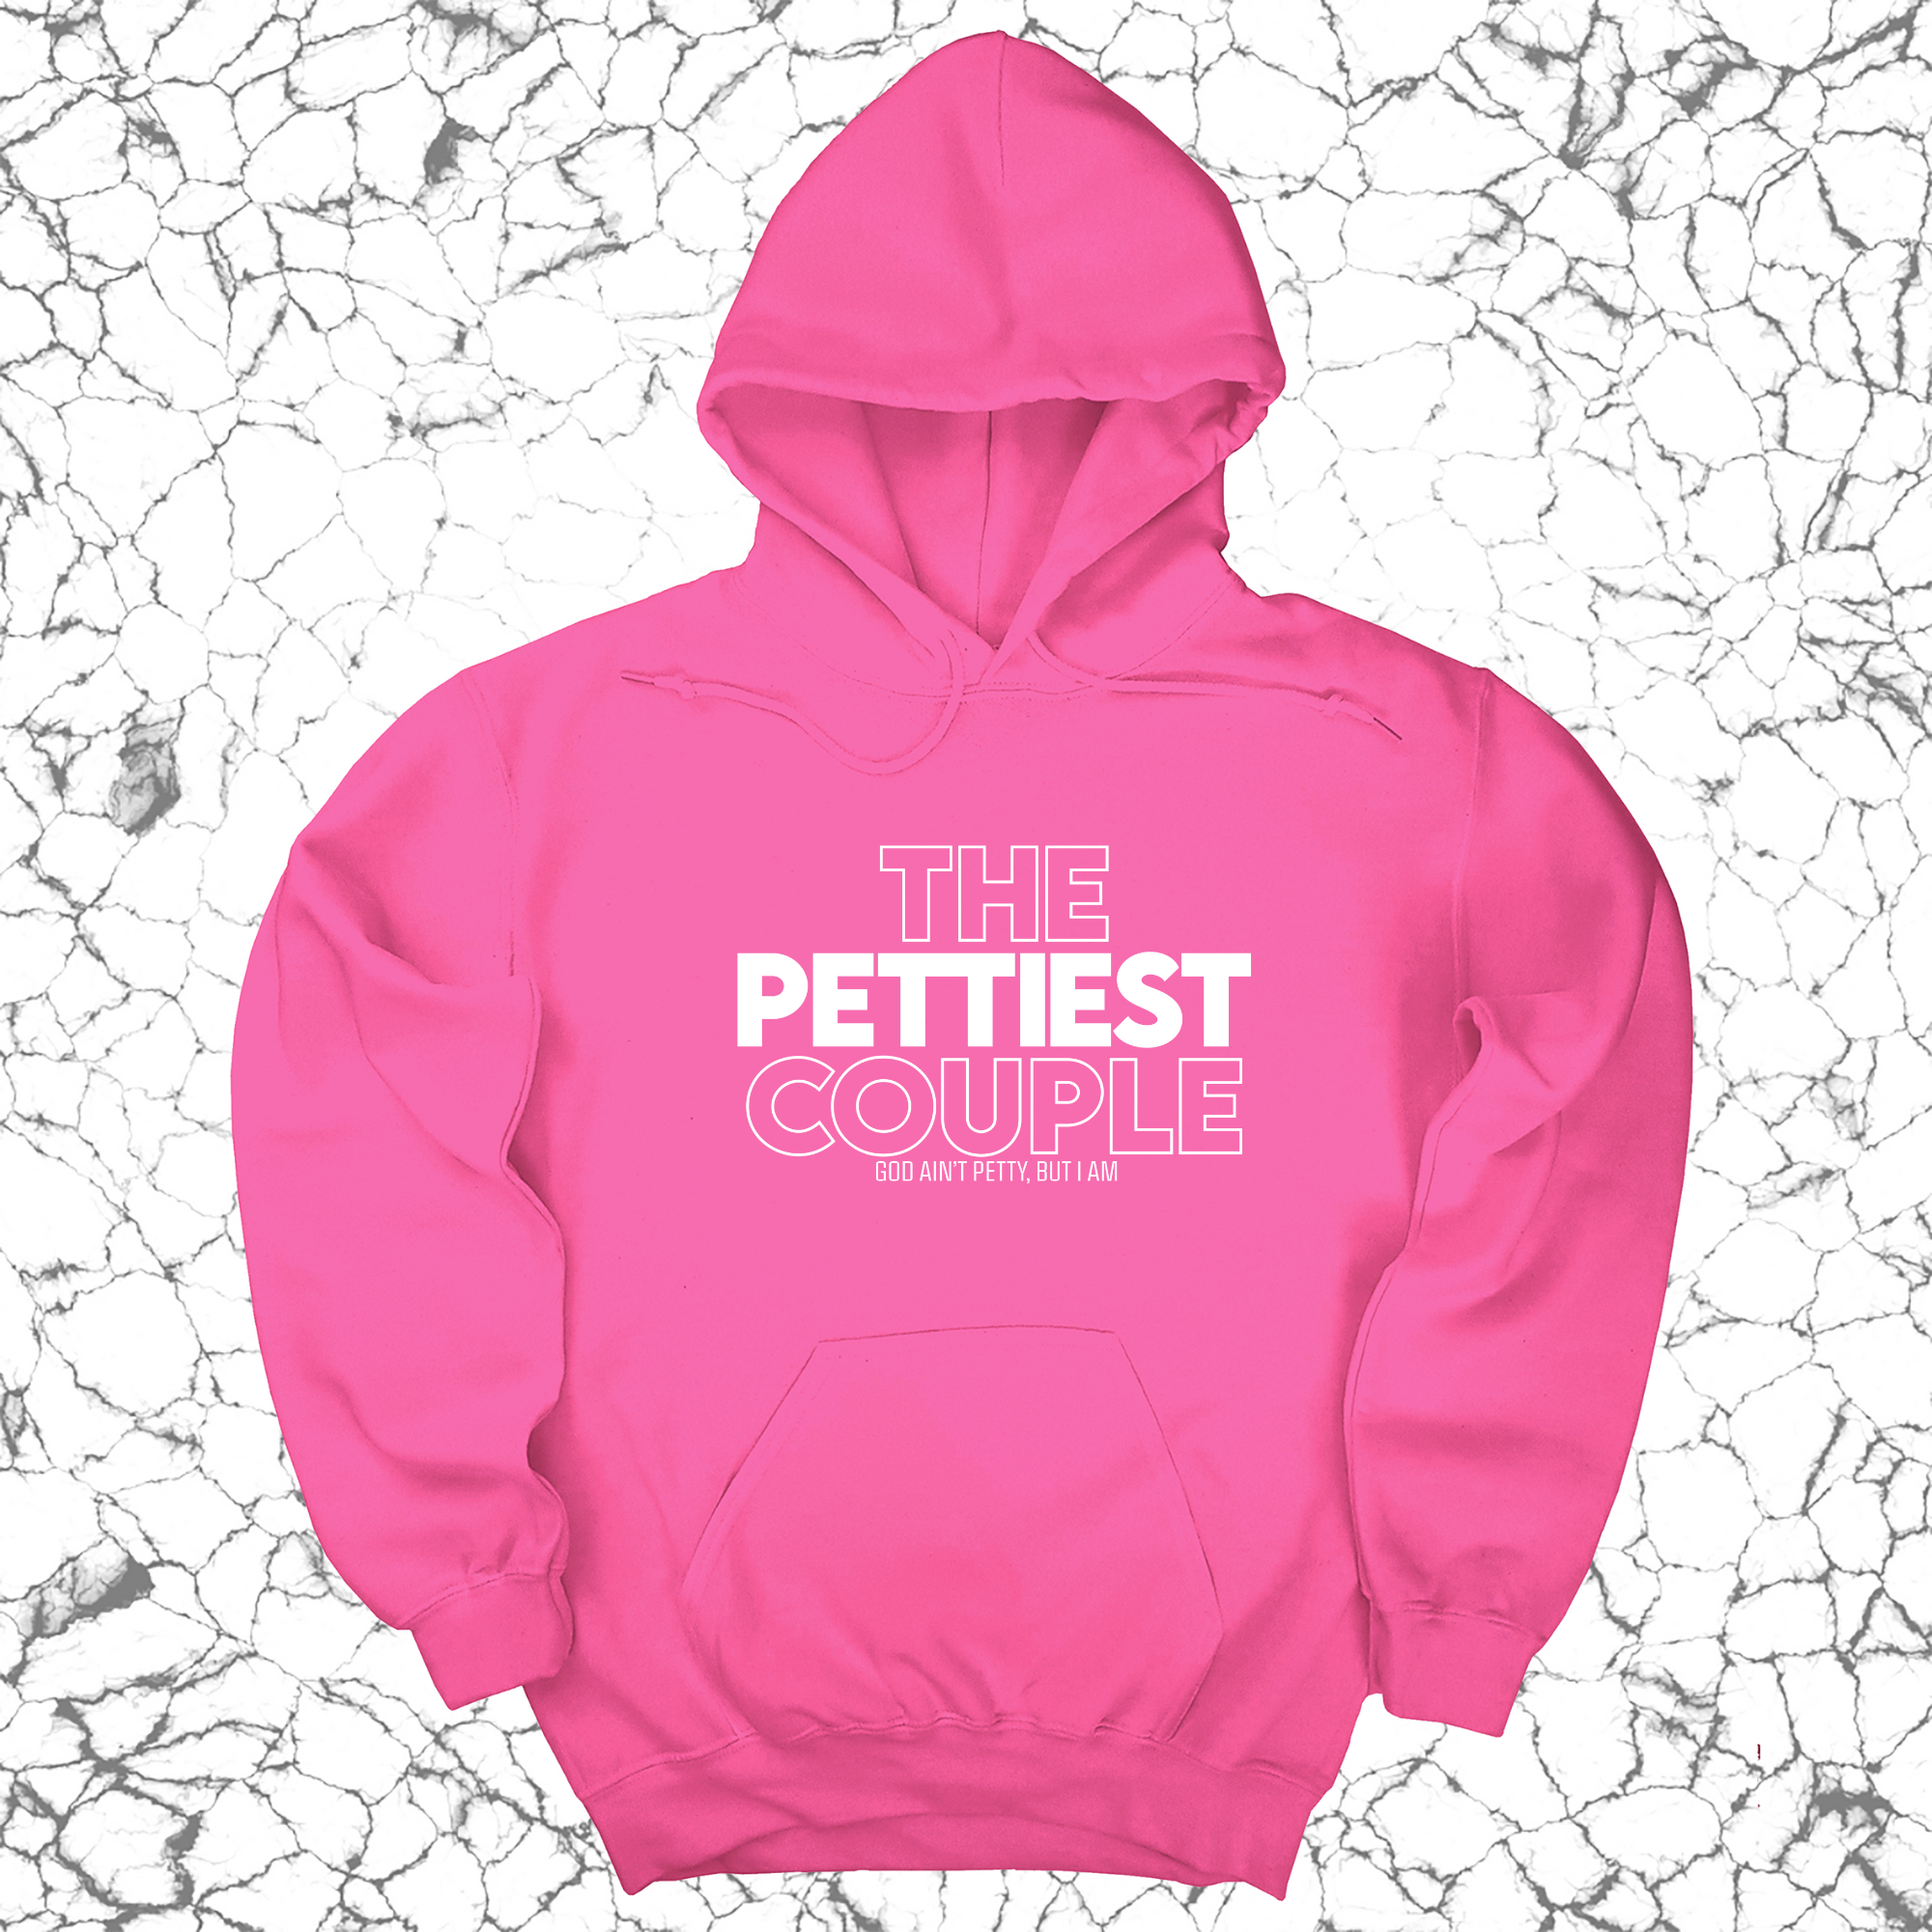 The Pettiest Couple Unisex Hoodie-Hoodie-The Original God Ain't Petty But I Am